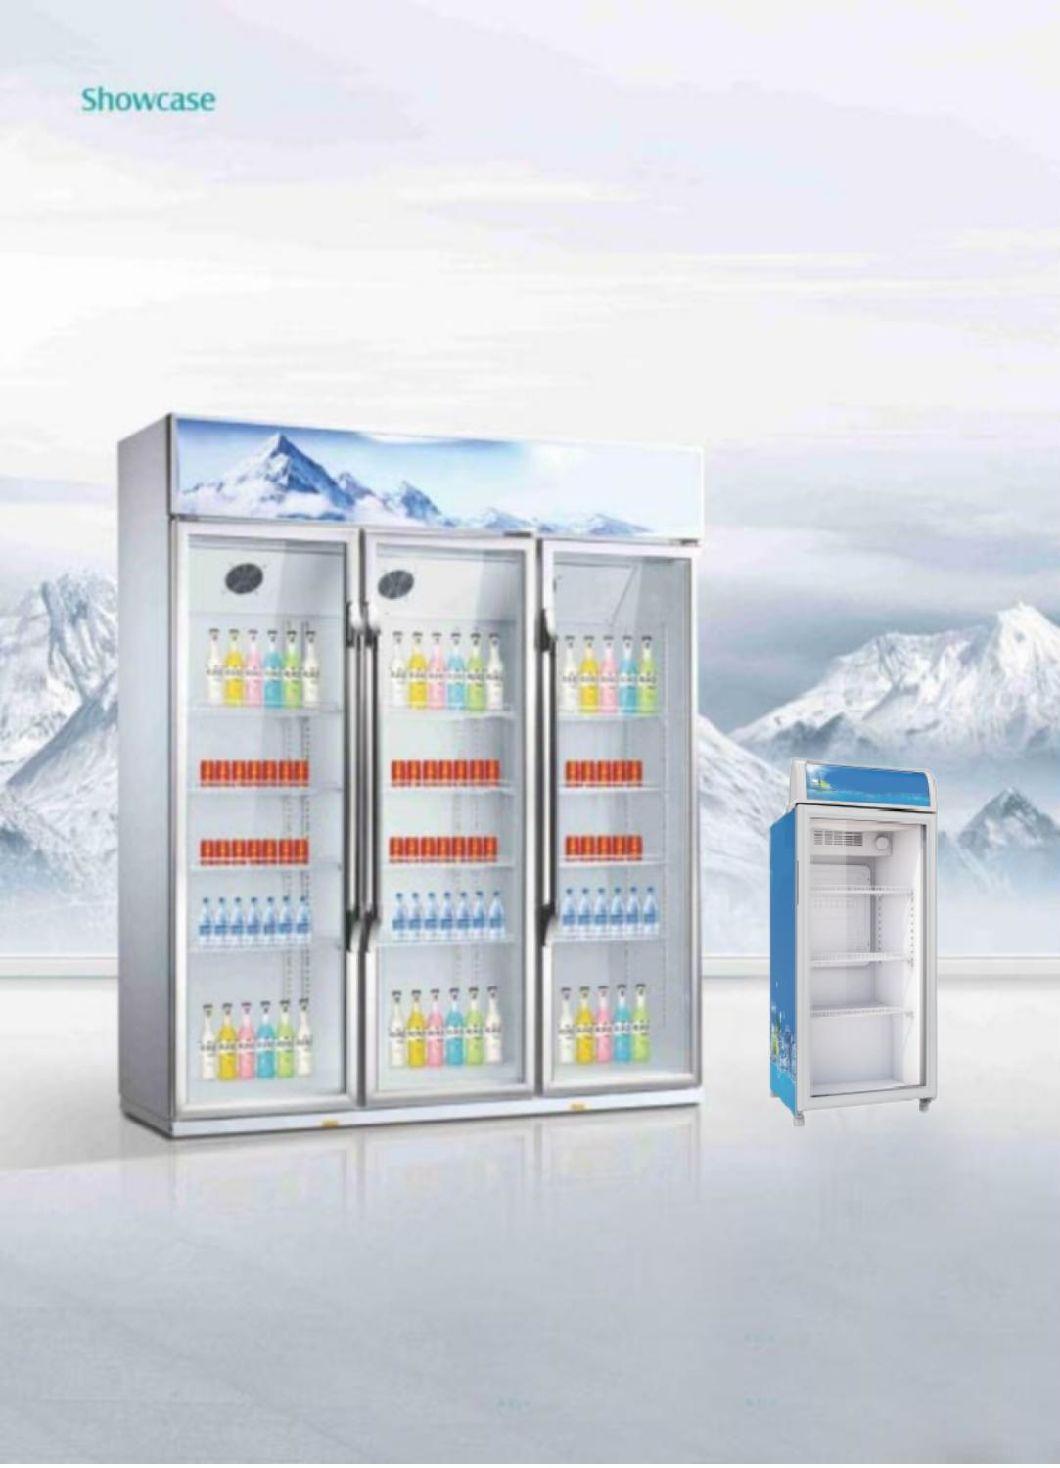 Commercial Fan Cooling Chiller Showcase Soft Drinks Supermarket Display Refrigerator/Showcase for China